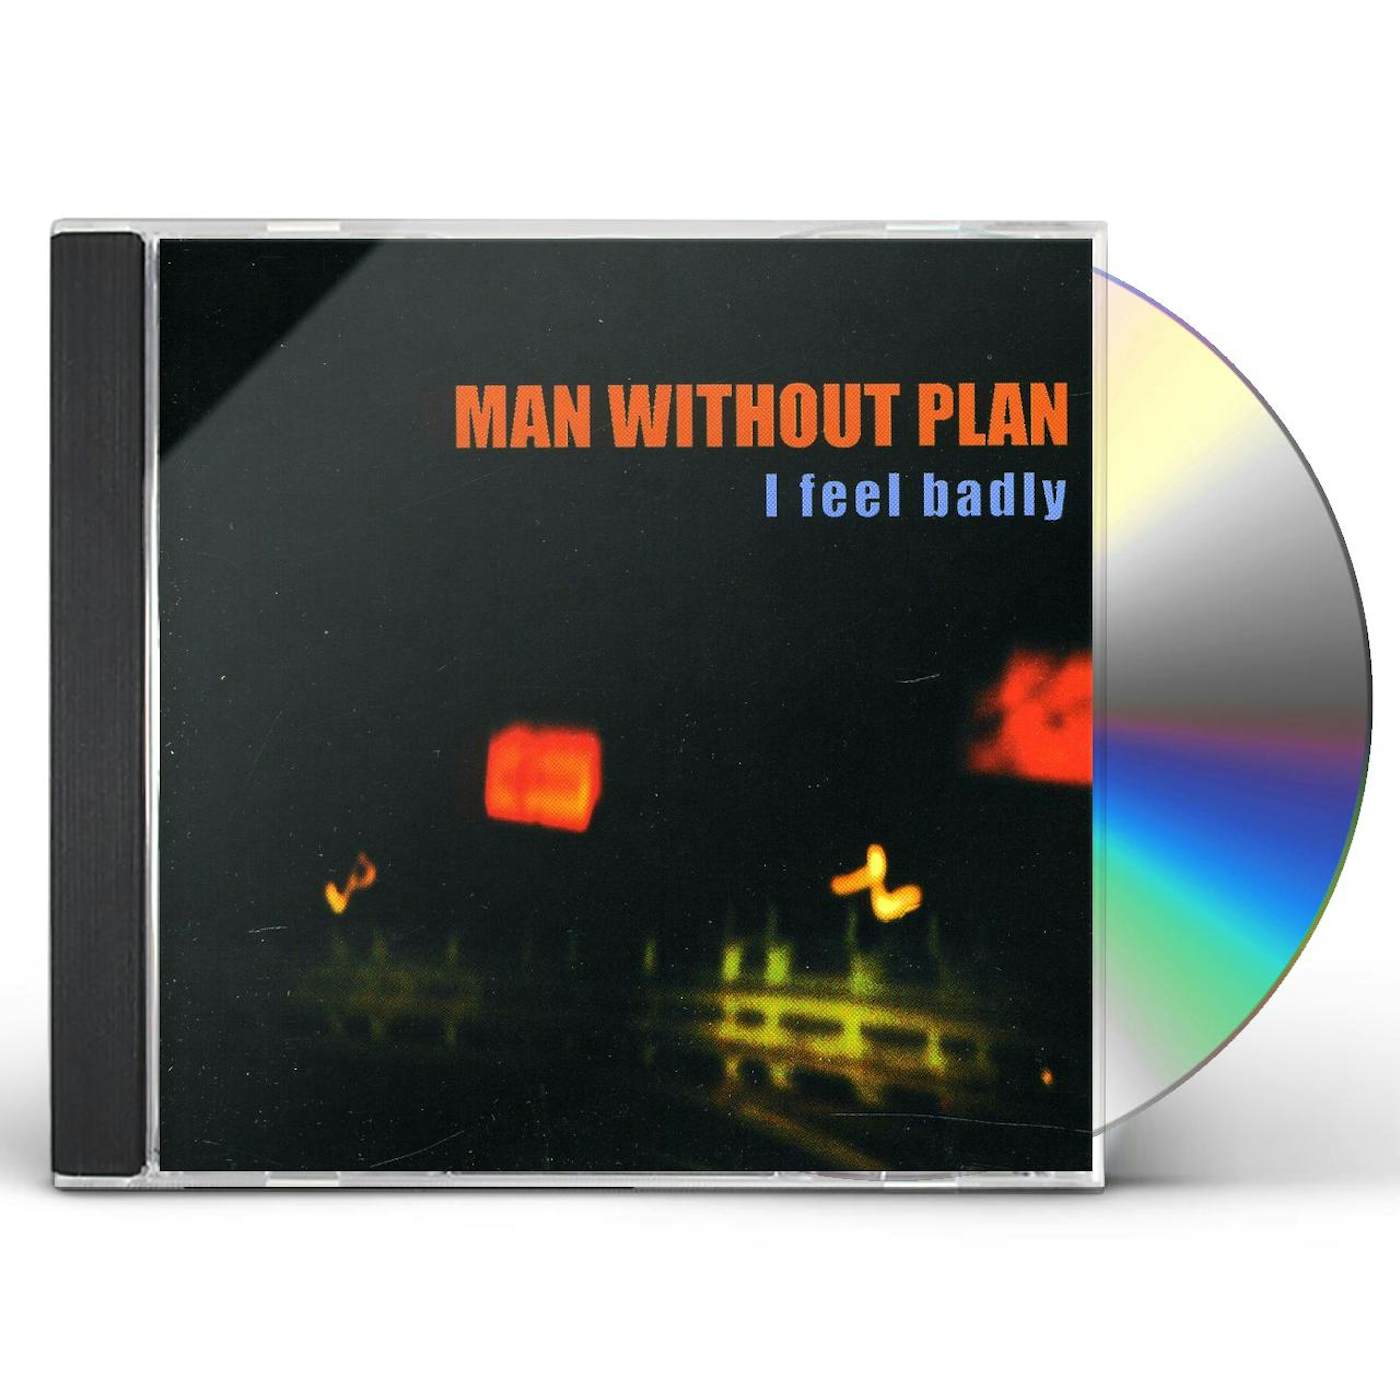 Man Without Plan I FEEL BADLY CD